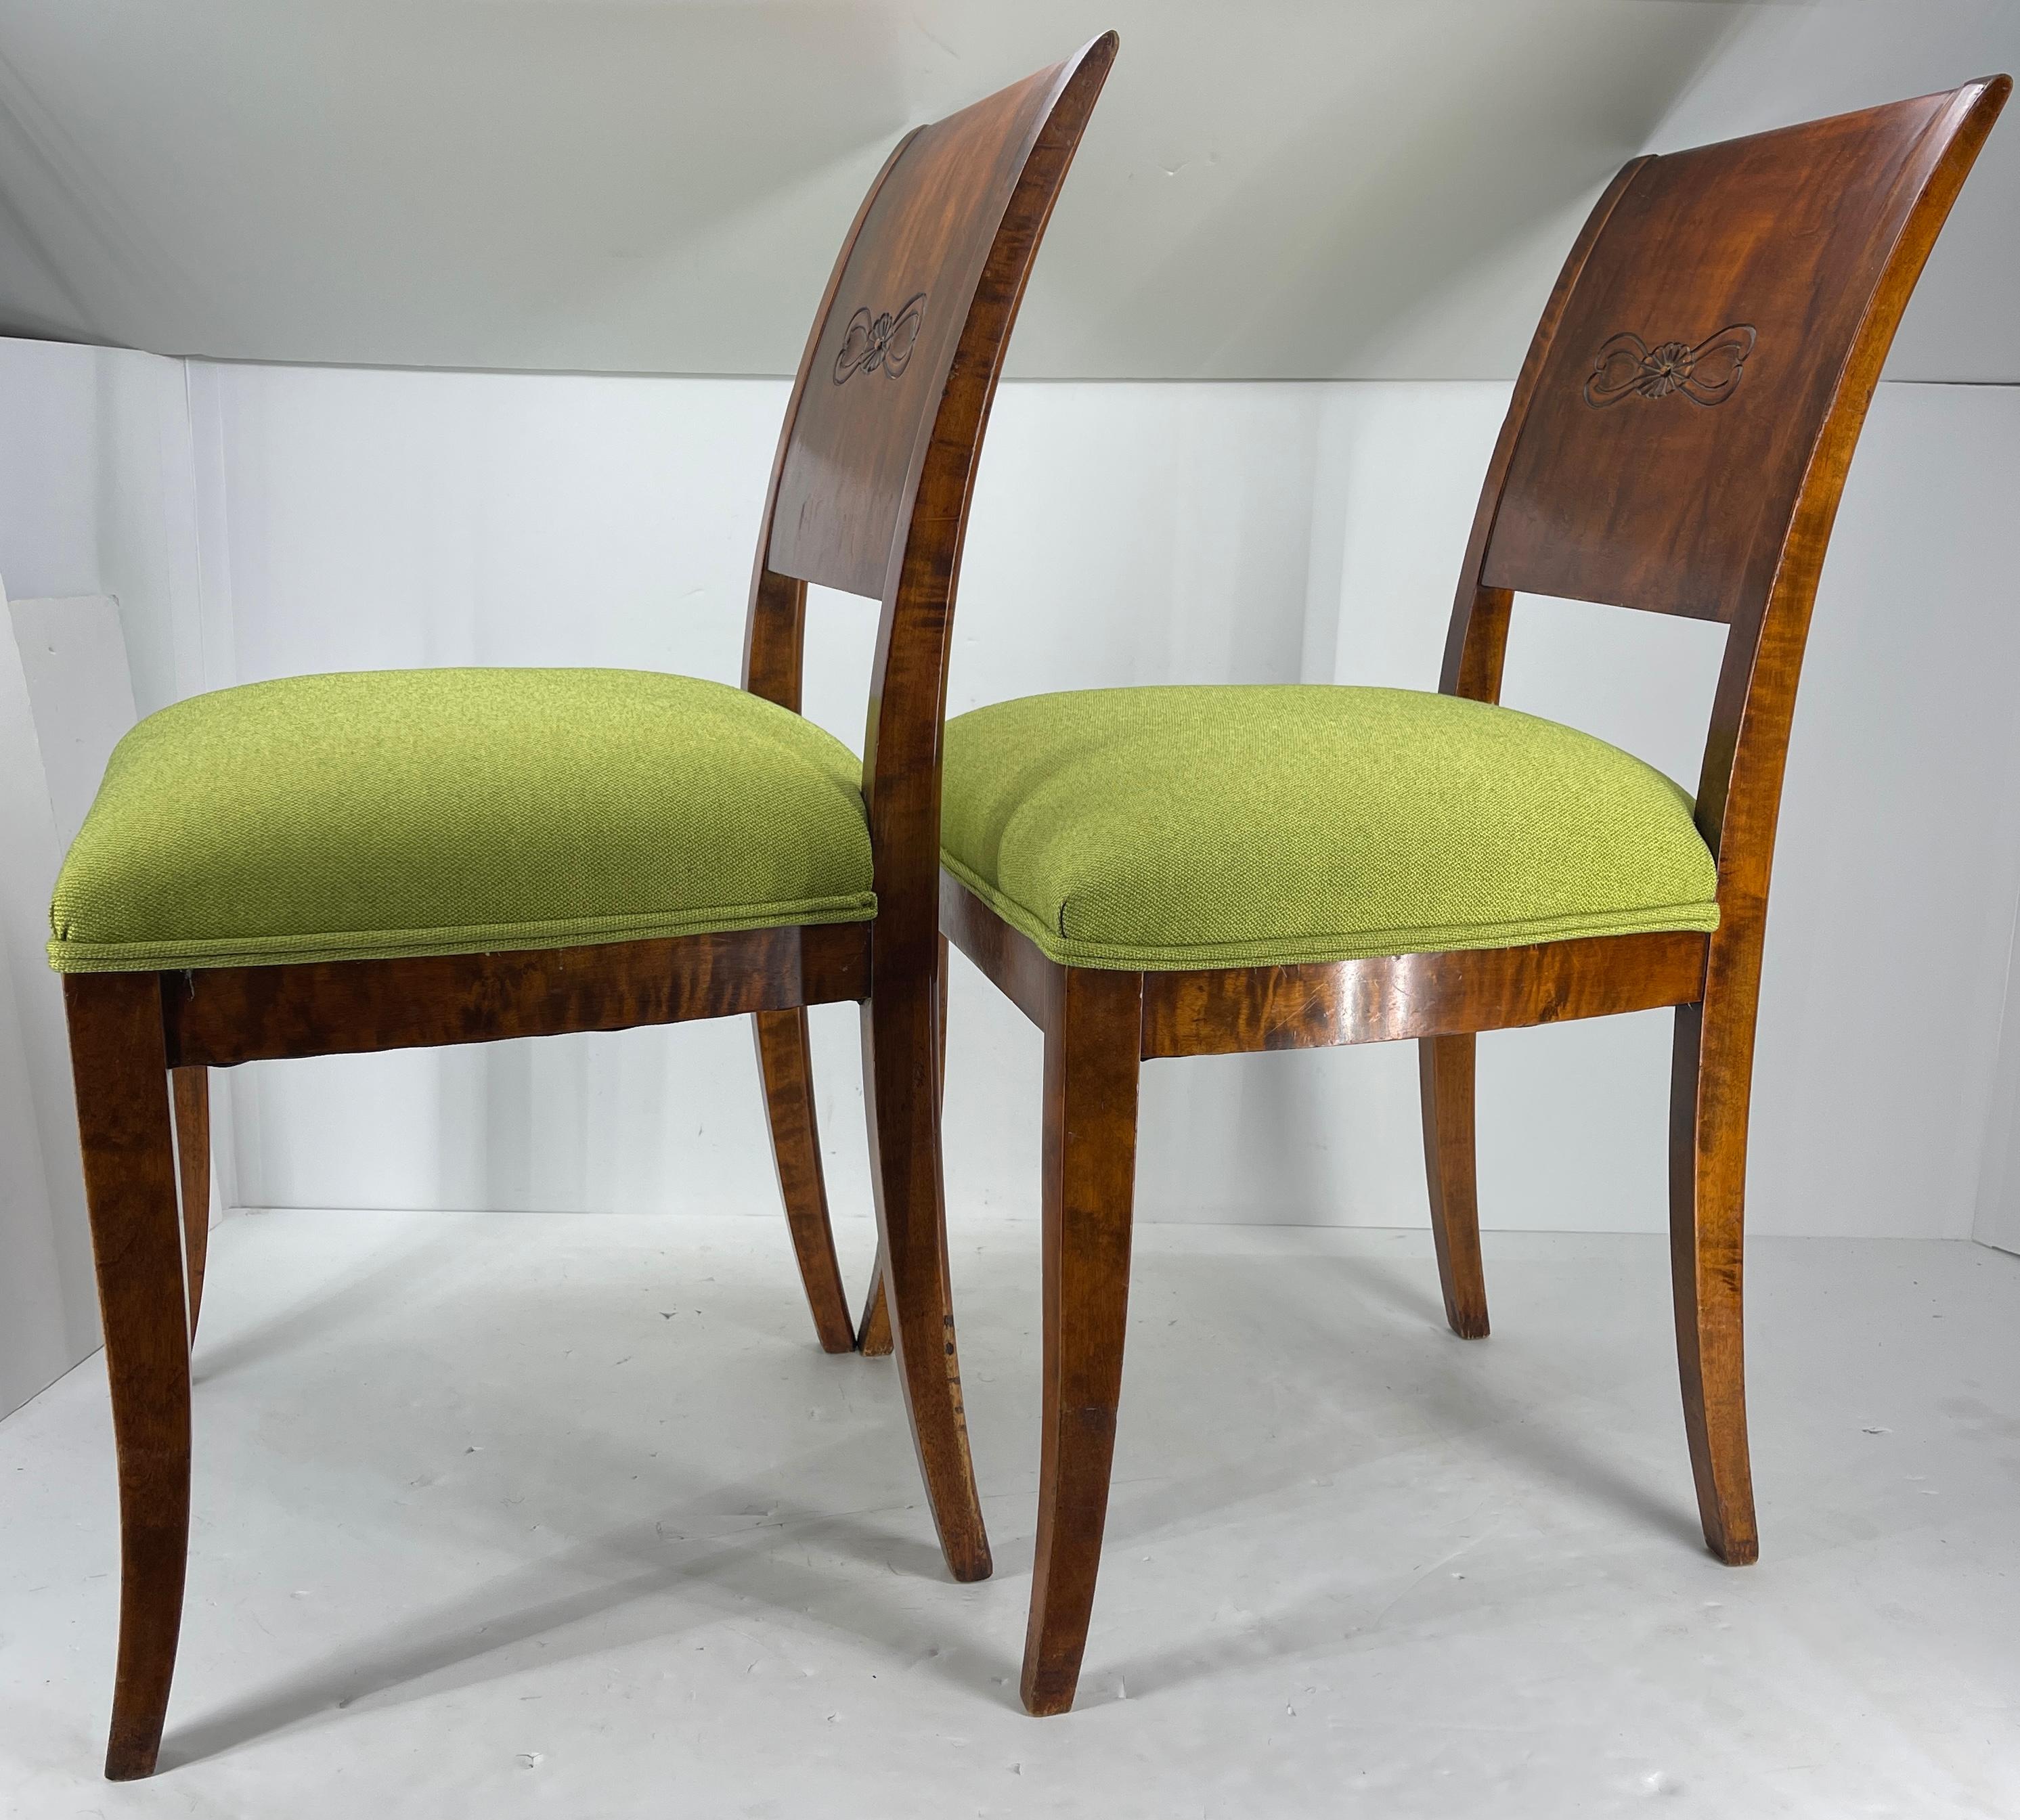 Mid-19th Century Pair of Danish Biedermeier Grass Green Upholstered Side Chairs For Sale